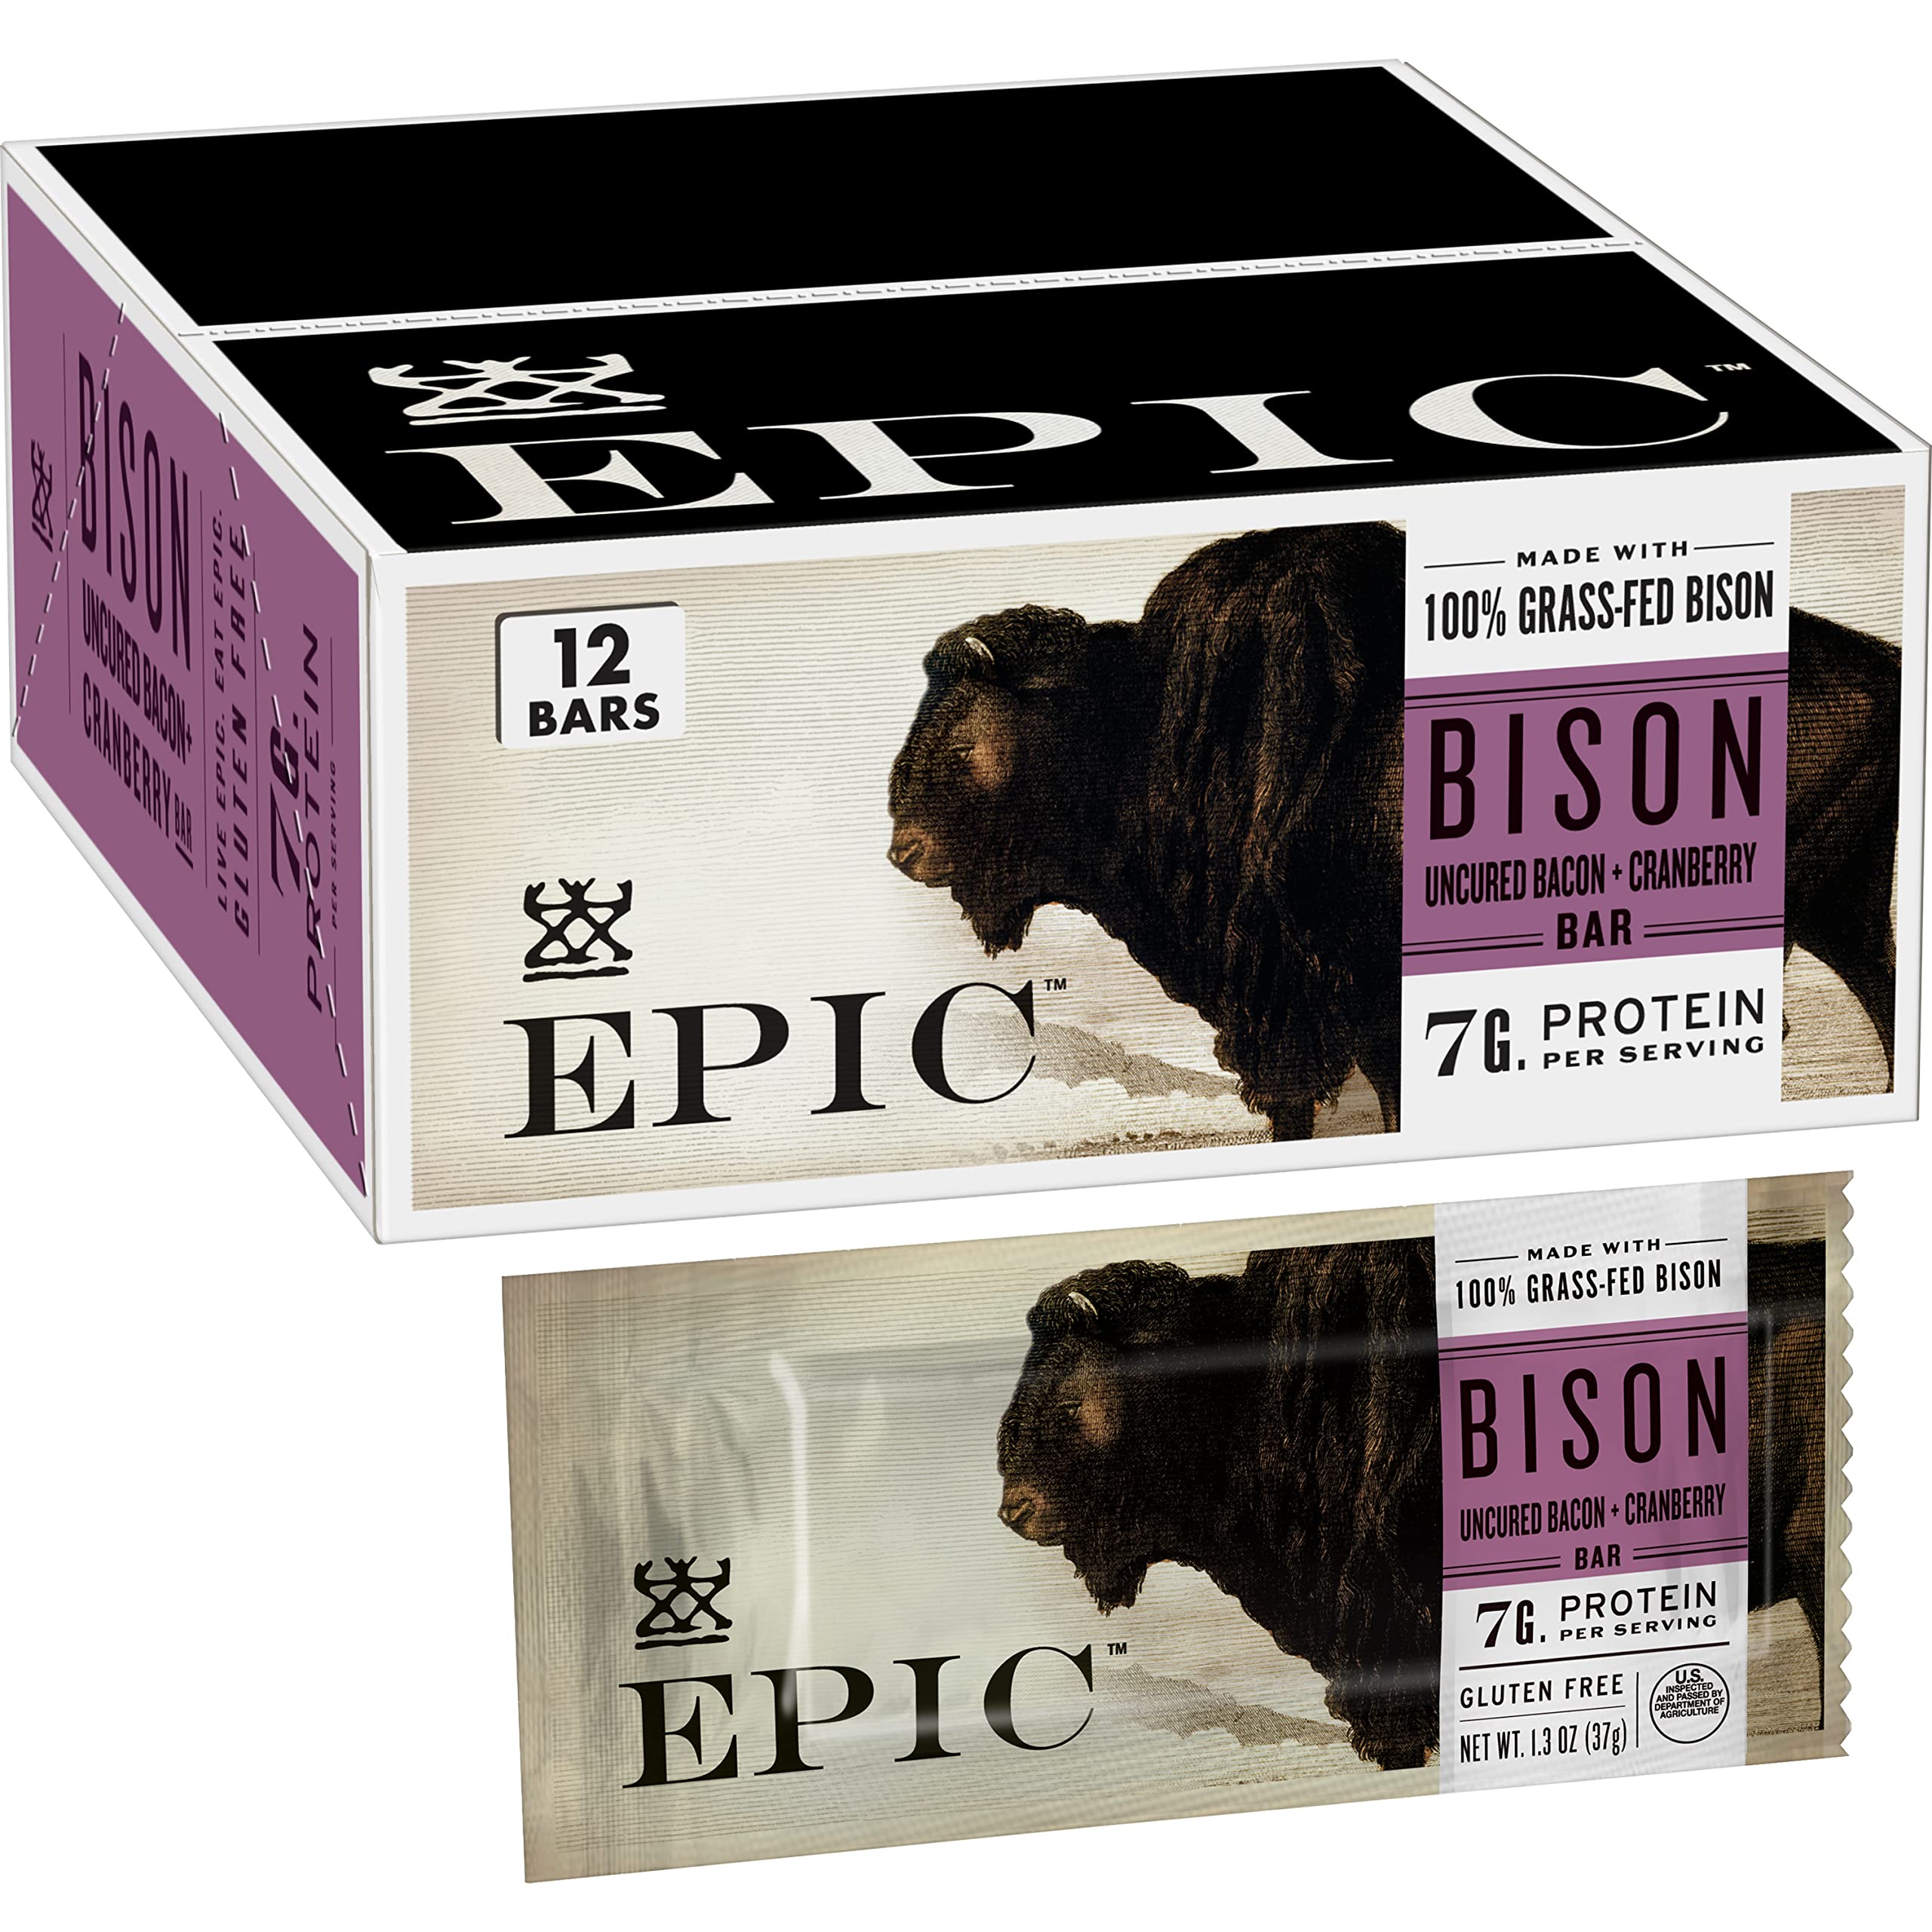 $21.11 /w S&S: EPIC Bison Bacon Cranberry Bars, Grass-Fed, 12 Count Box 1.3oz bars